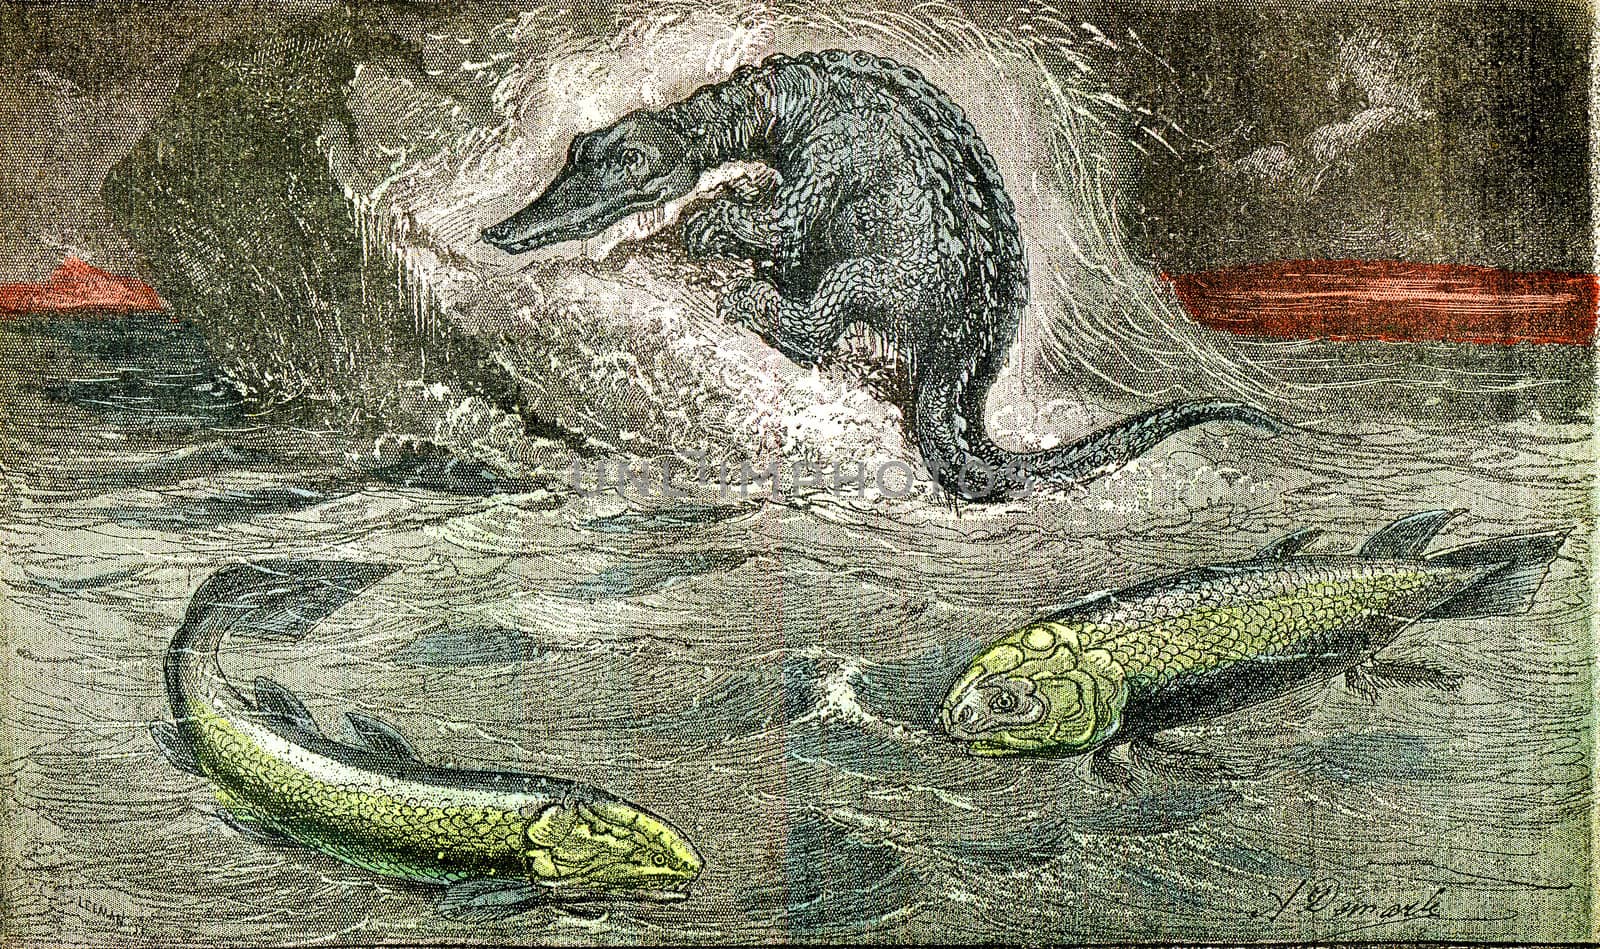 Transition from fish to reptiles, vintage engraved illustration. From Natural Creation and Living Beings.
